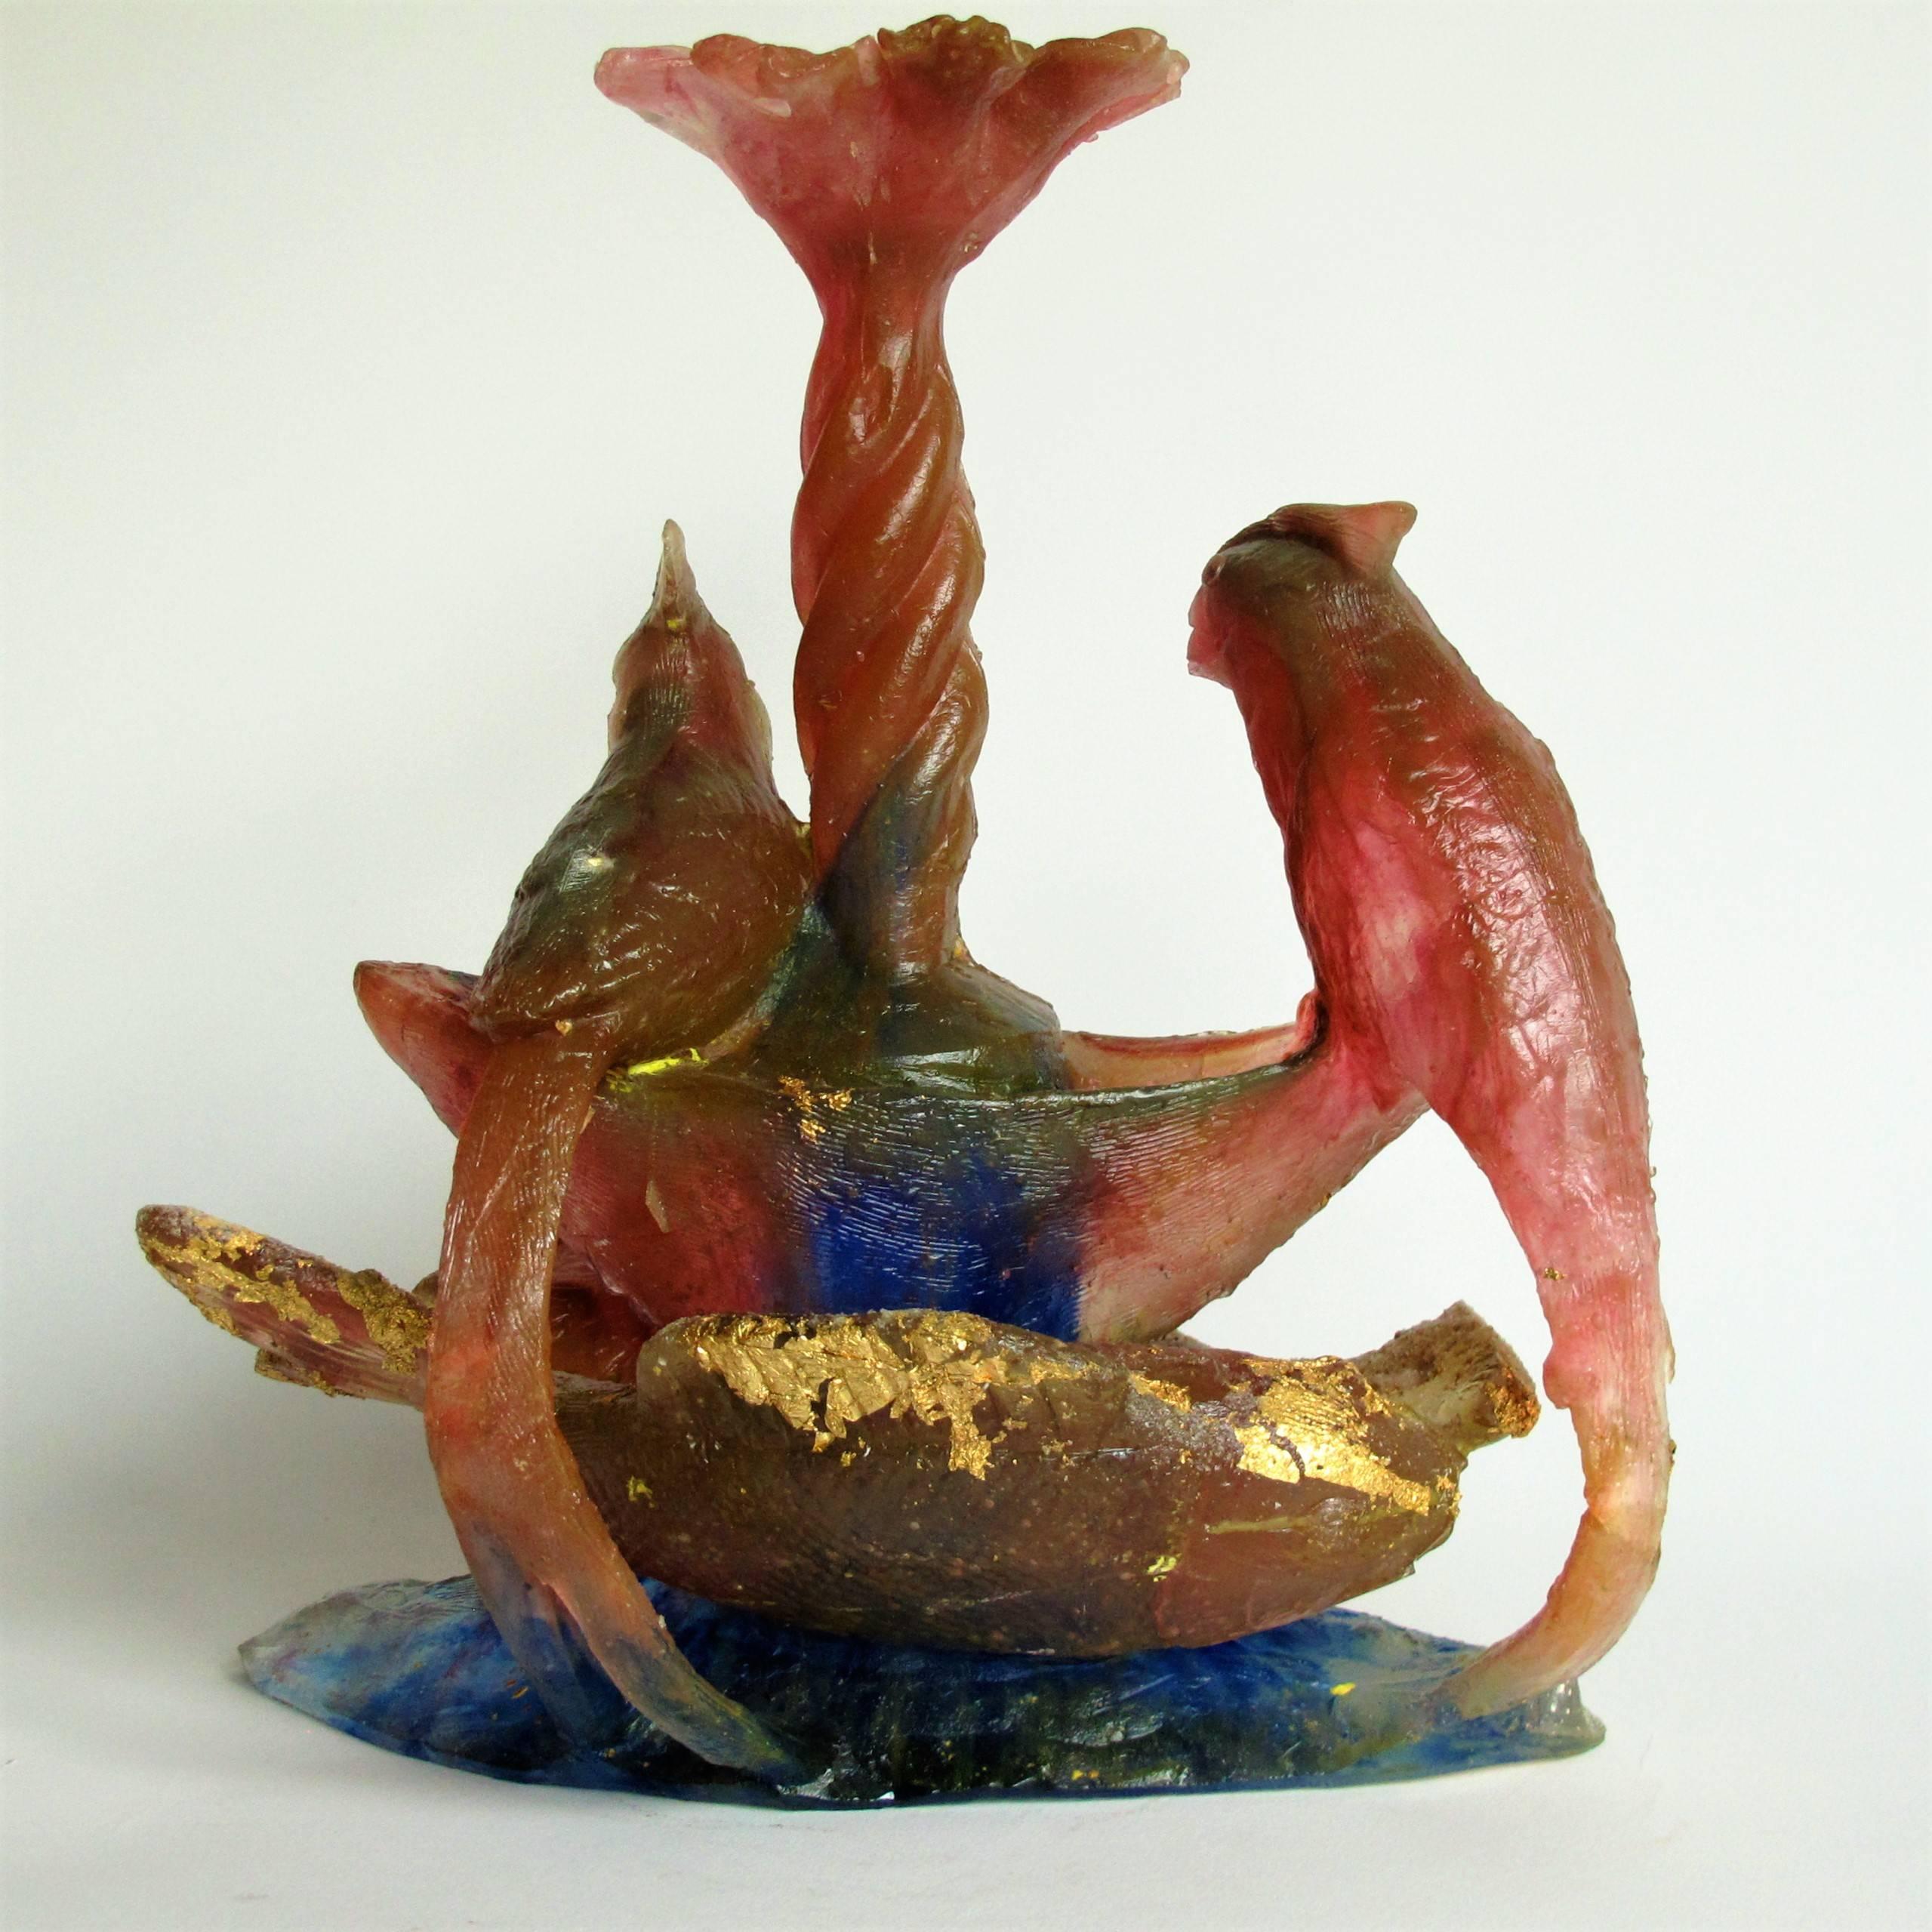 This pate de verre object by Richard Price (Hampshire 1960) is of an extreme pink and bluish coloring, with some touches of gold.
In this piece, Price combines a number of elements he frequently uses in his work. The top consists of a twisted